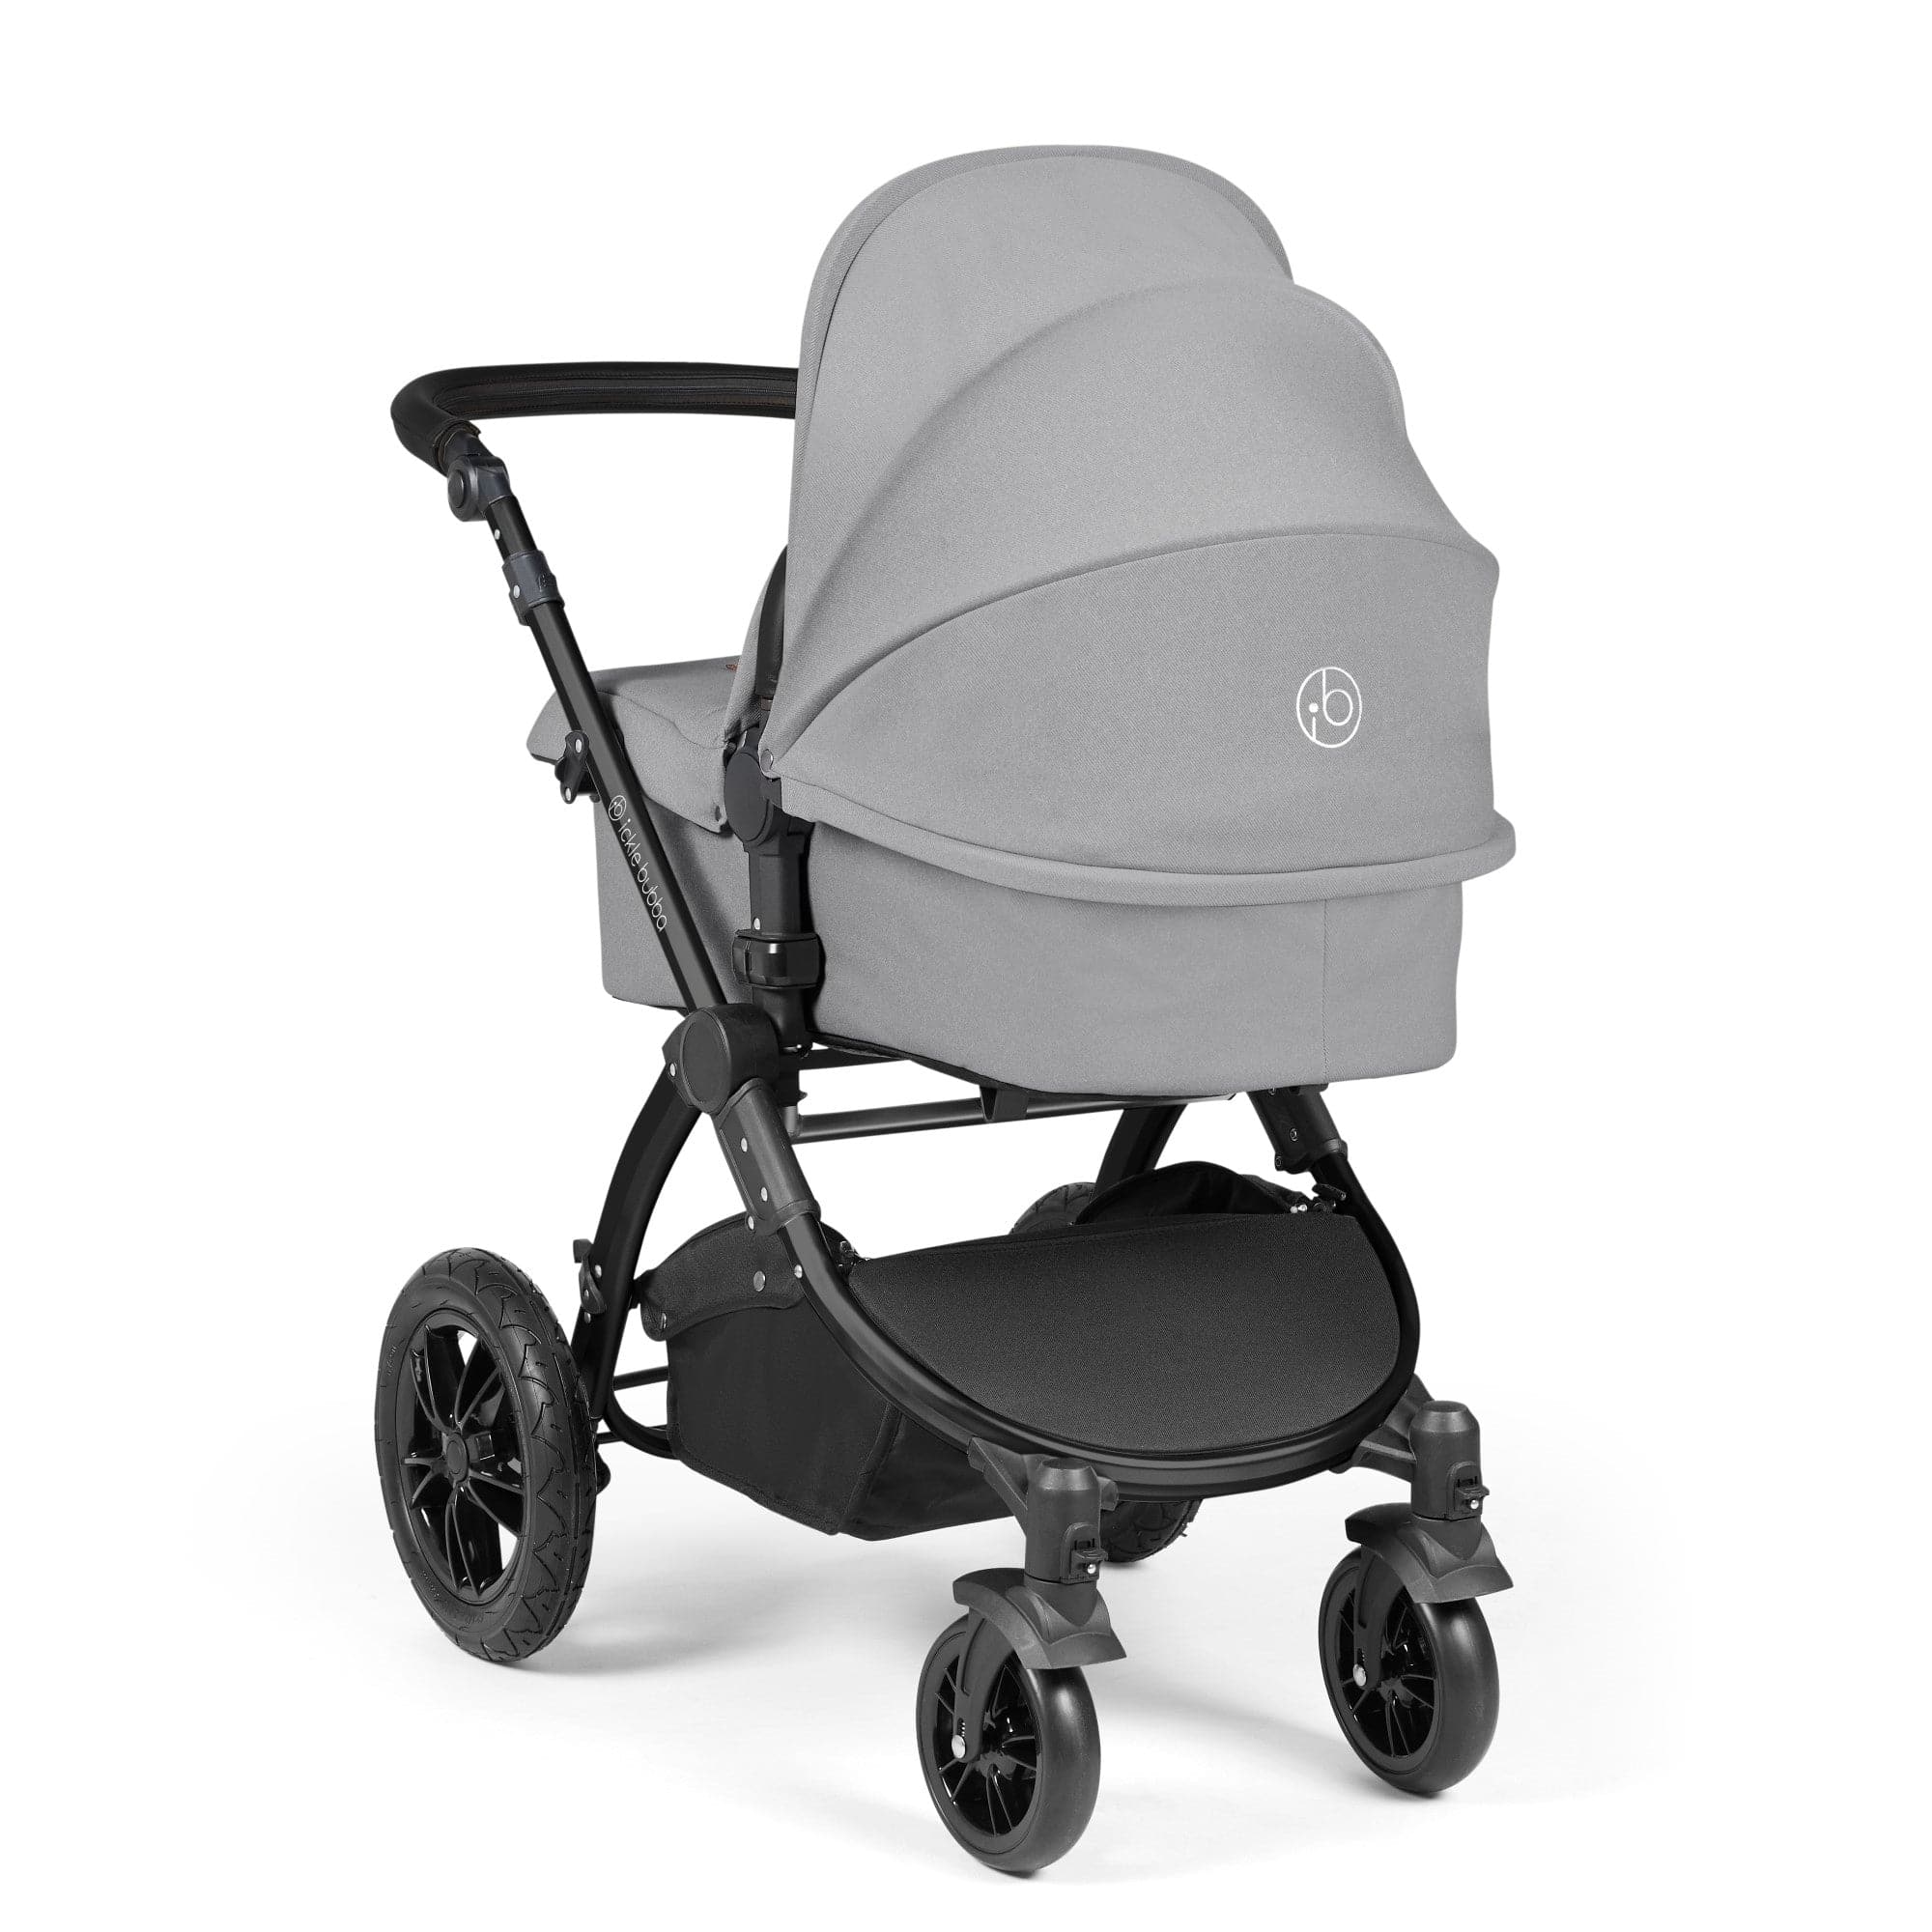 Ickle Bubba Stomp Luxe All-In-One I-Size Travel System With Isofix Base- Black / Pearl Grey / Black -  | For Your Little One